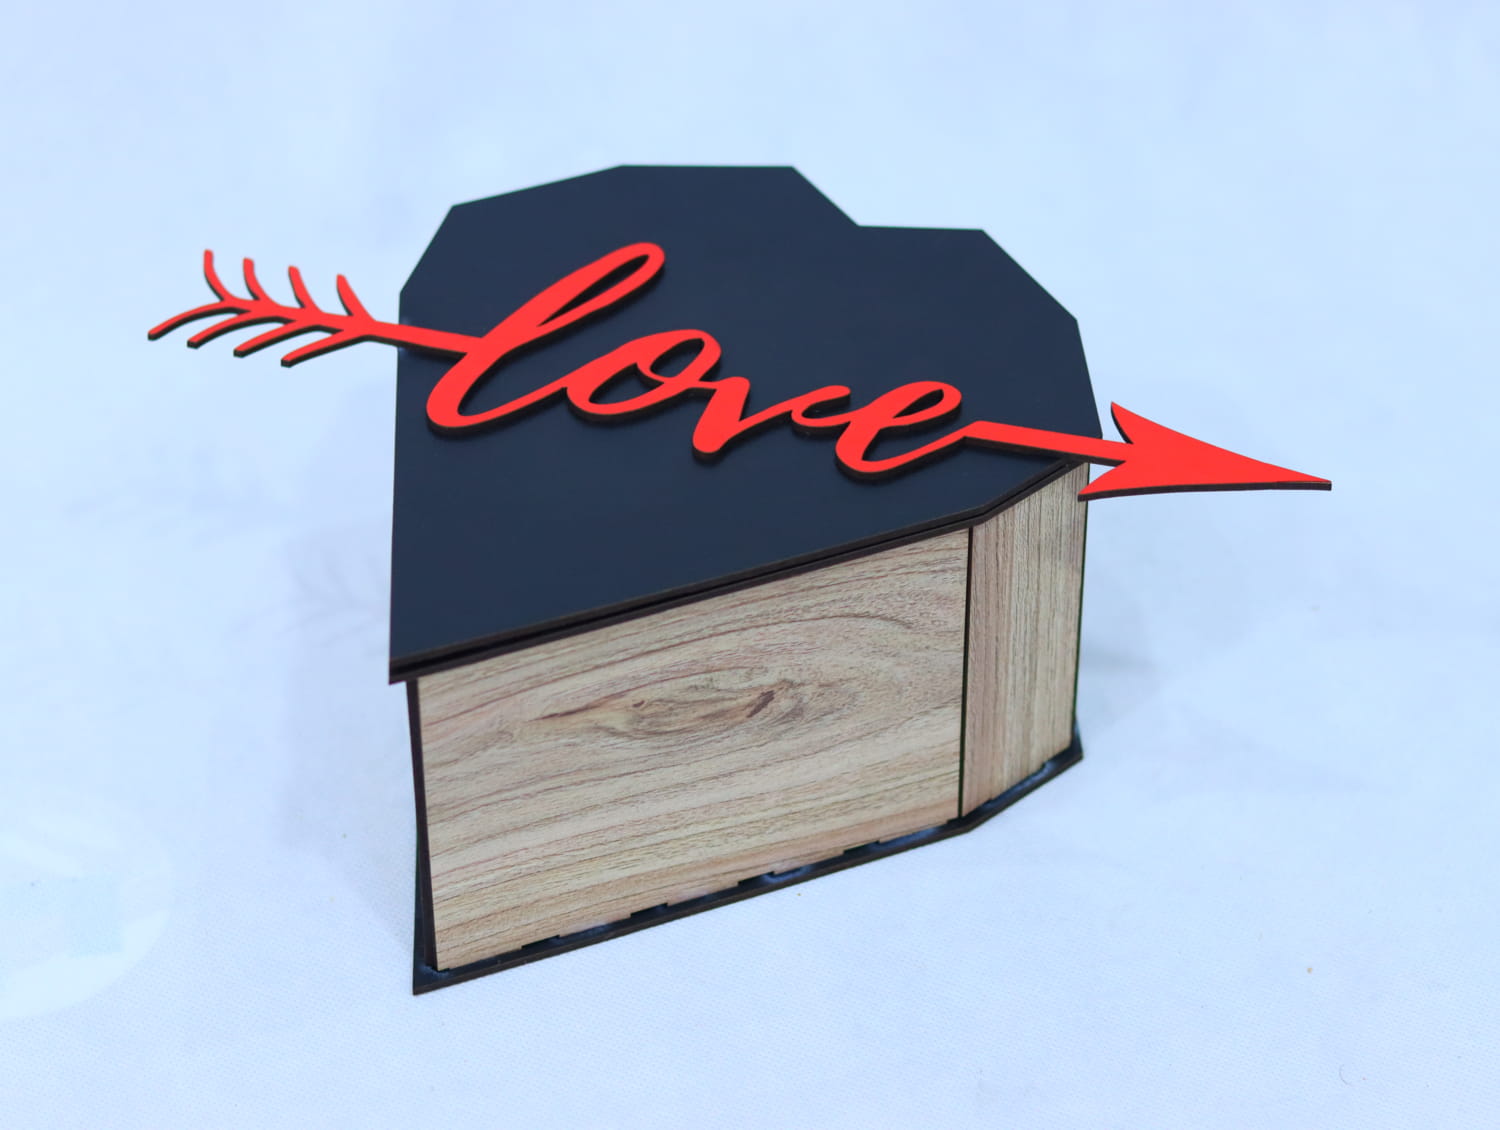 Laser Cut Valentine’s Day Heart Shaped Gift Box Free Vector